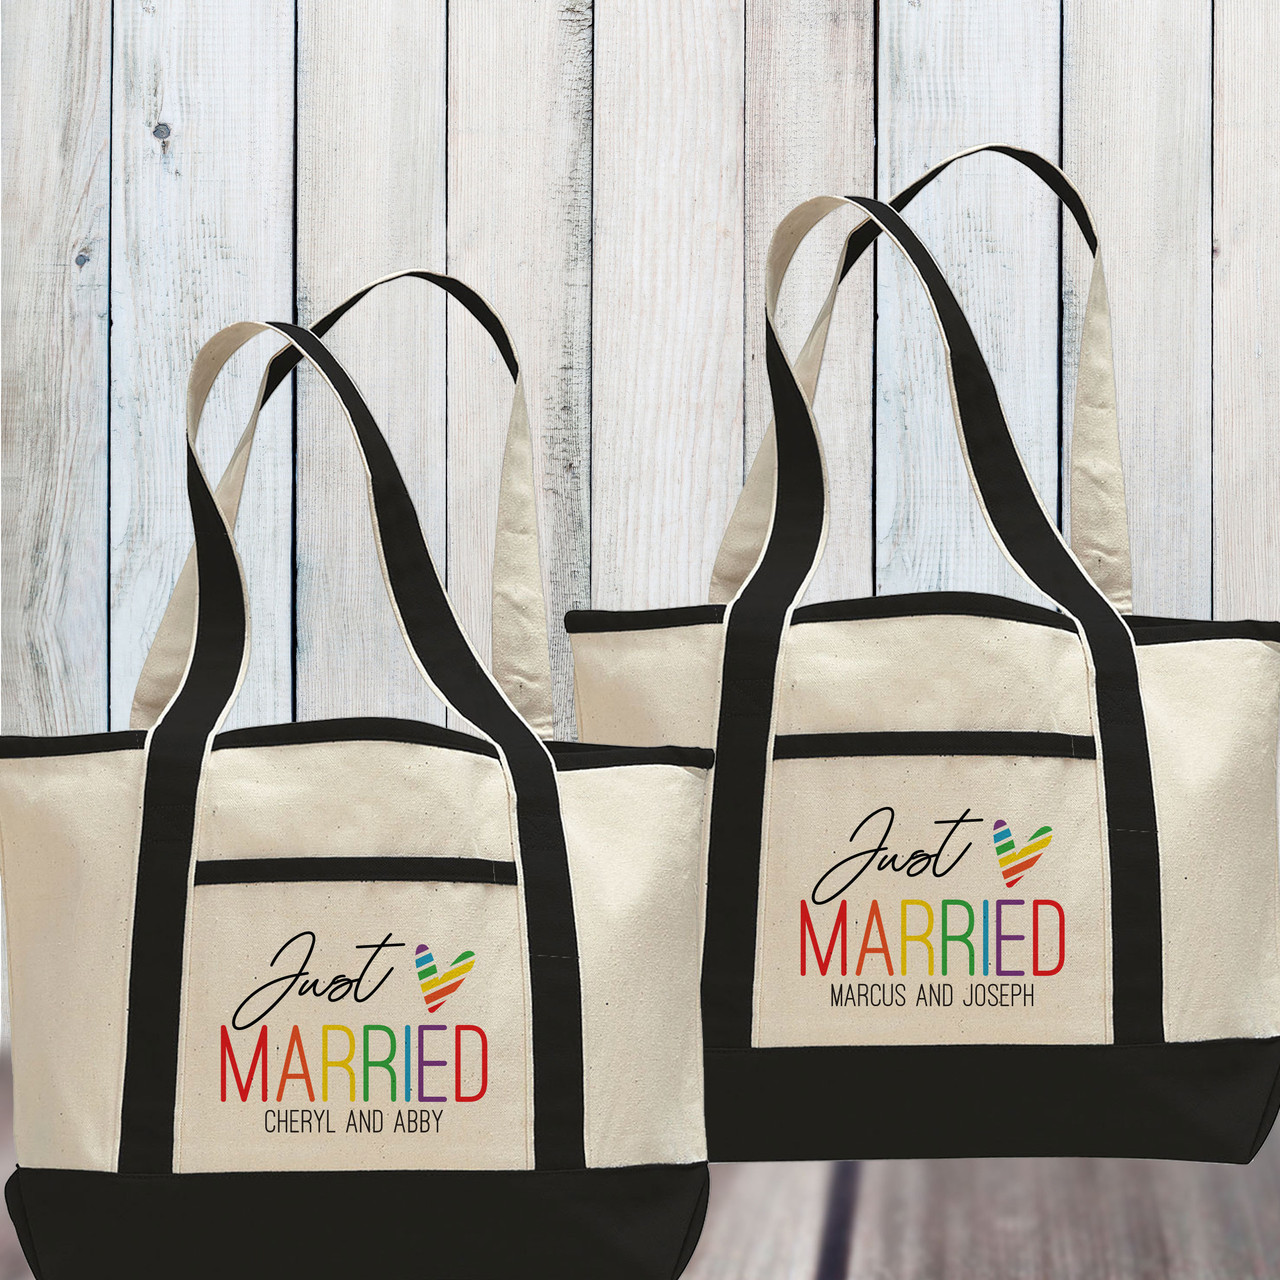 Just Married Personalized Beach Tote Bag for Same Sex Couple photo